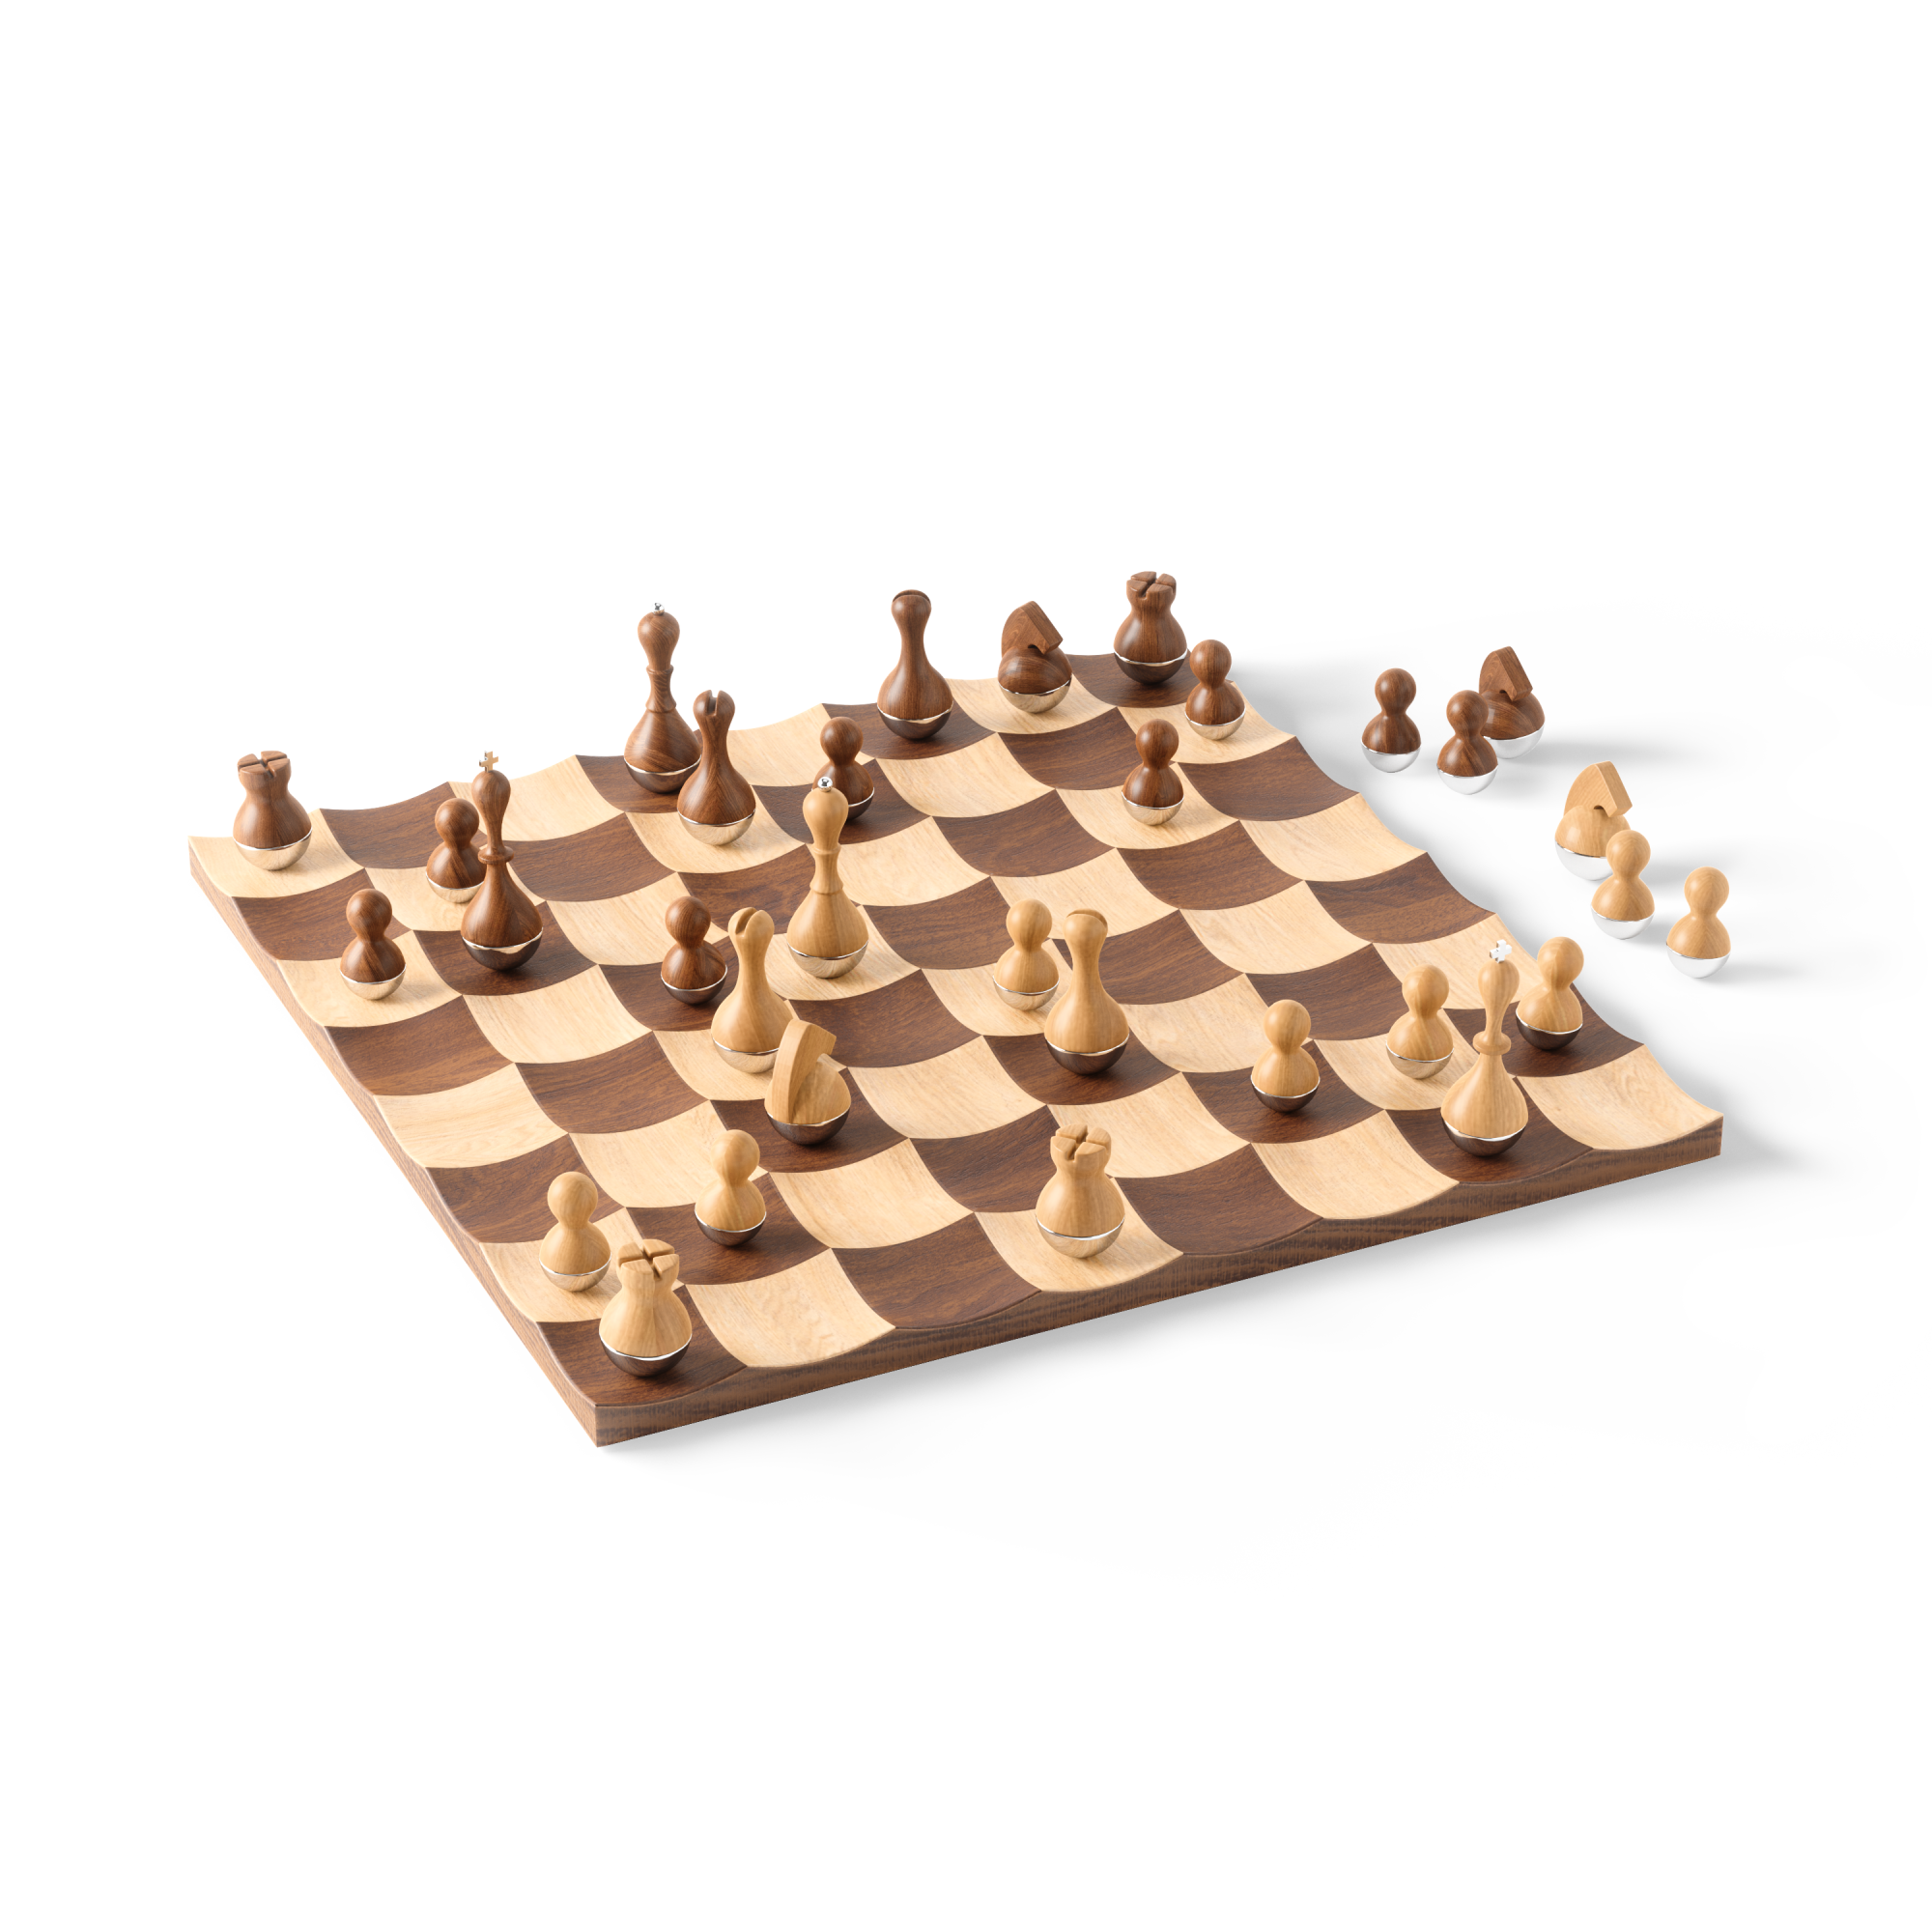 Your Move Chess & Games: How to Choose a Chess Set